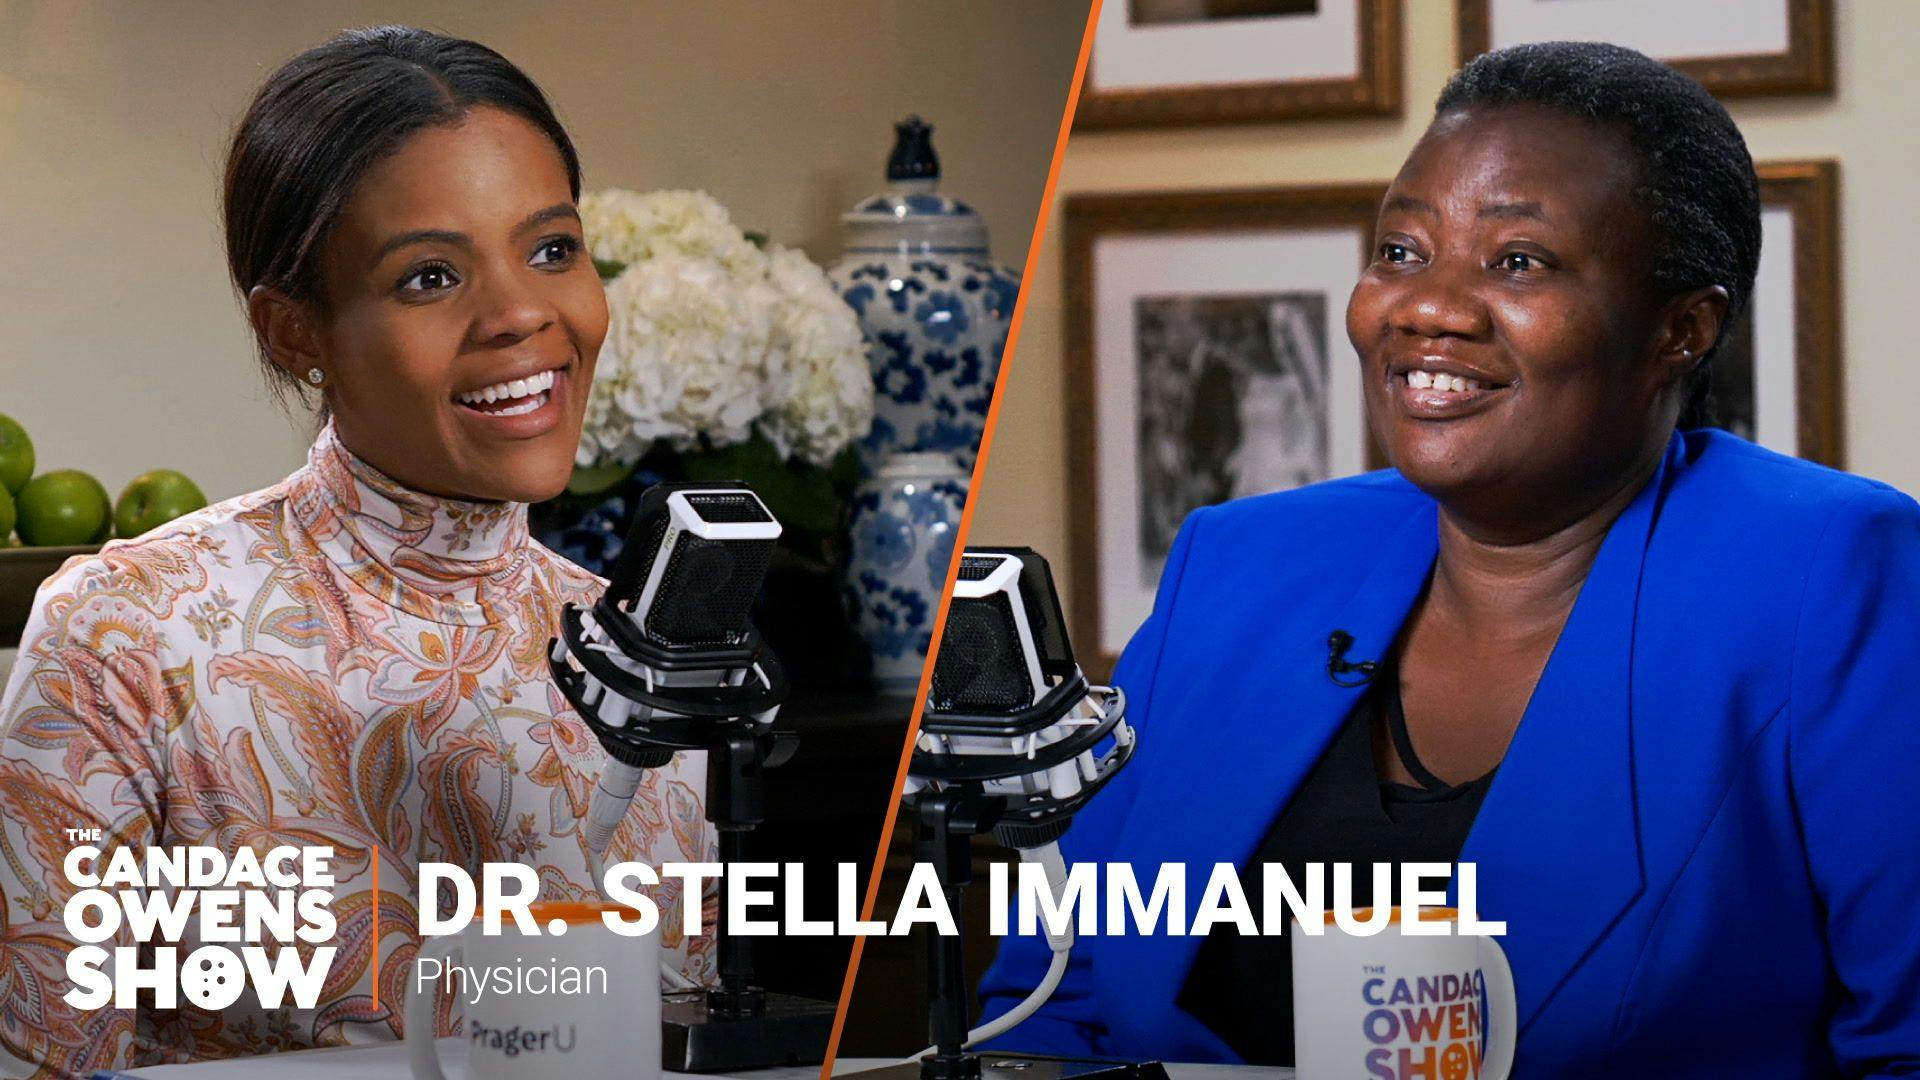 The Candace Owens Show: Dr. Stella Immanuel